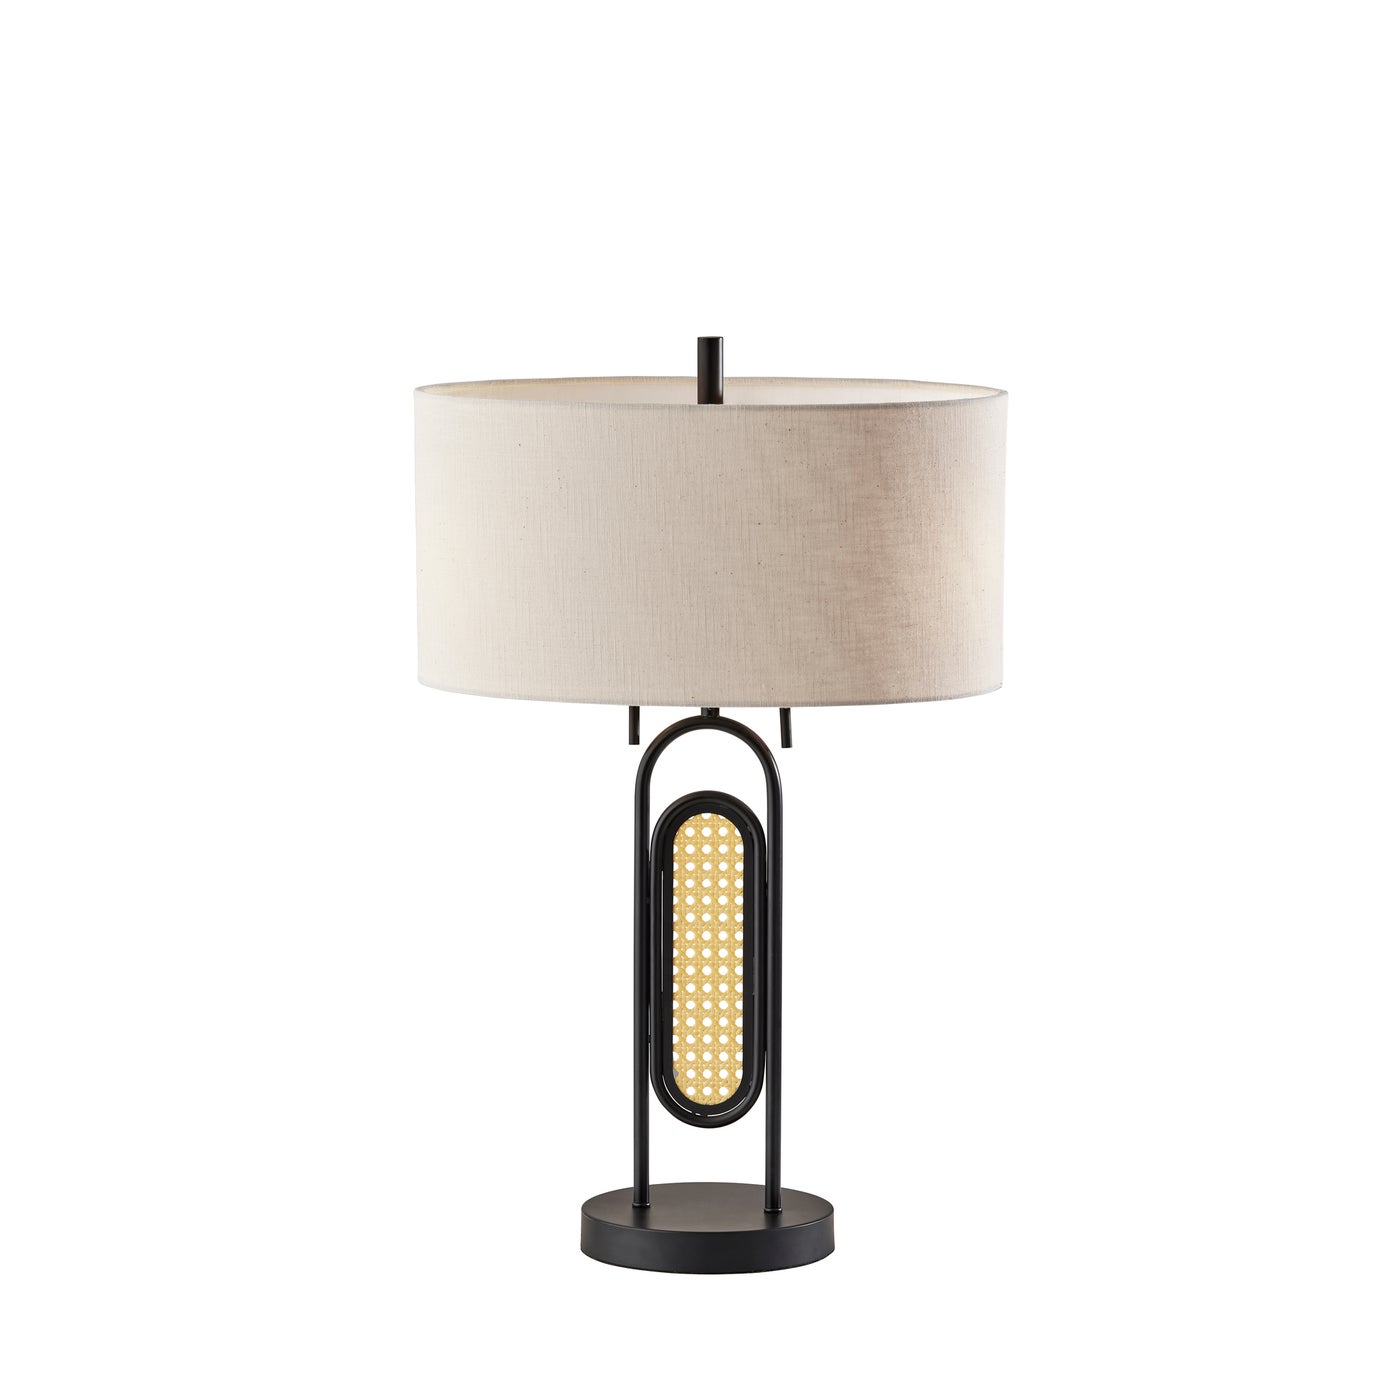 Adesso Home - 4325-01 - Two Light Table Lamp - Levy - Black W. Webbed Caning Material